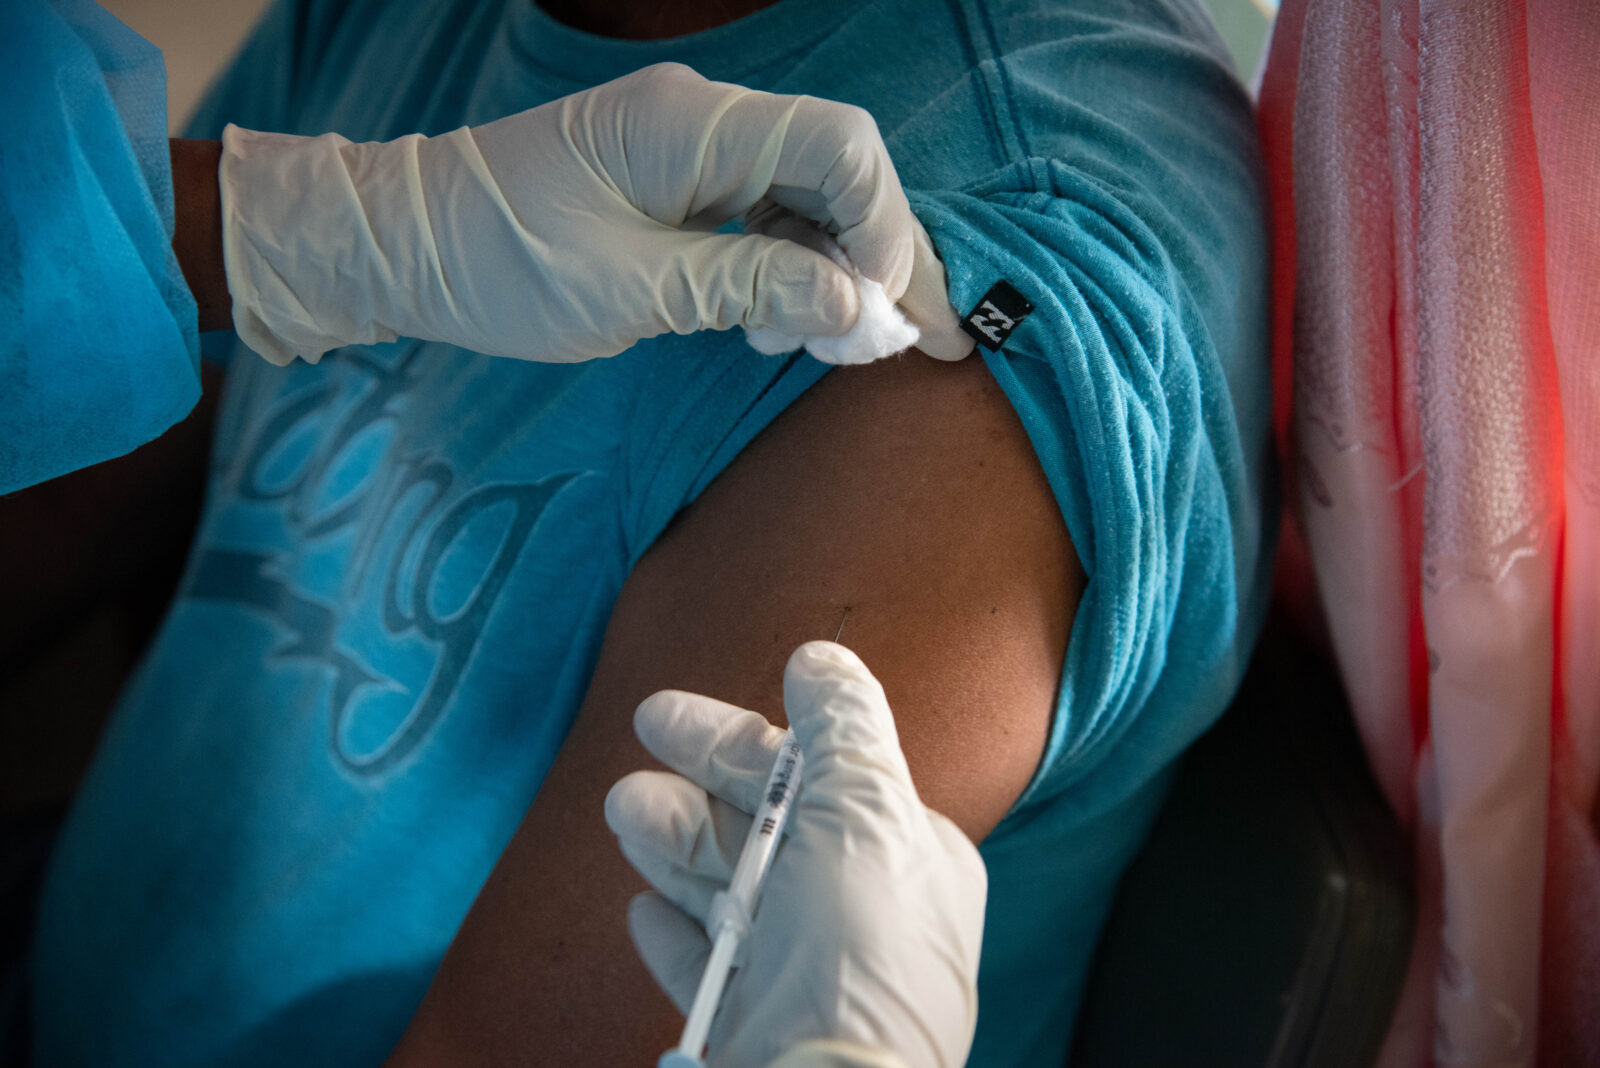 The COVID-19 vaccine being administered (DPI photo)